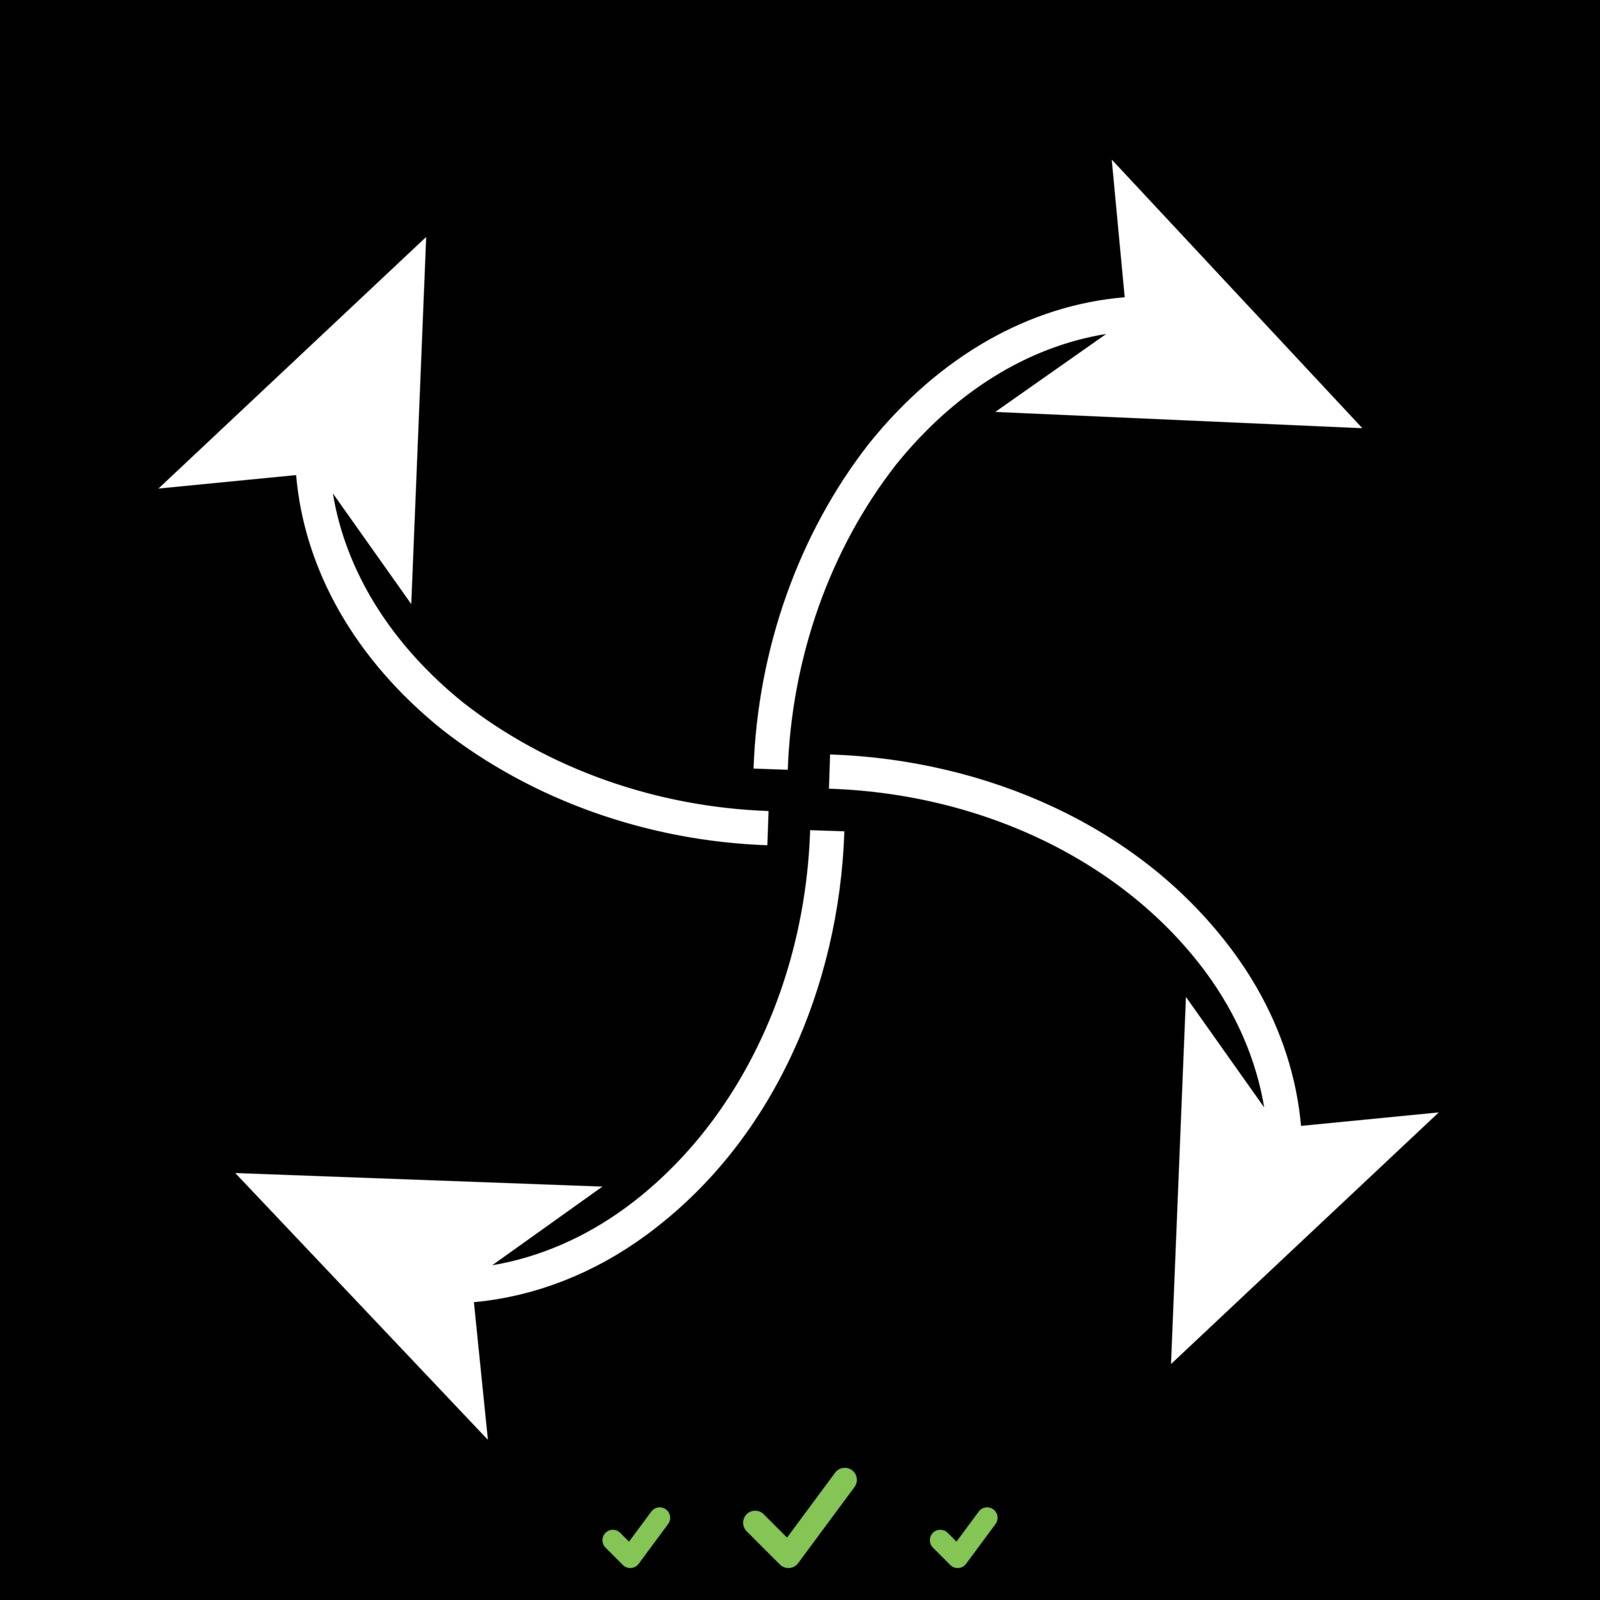 Four arrows in loop from center it is white icon . Flat style